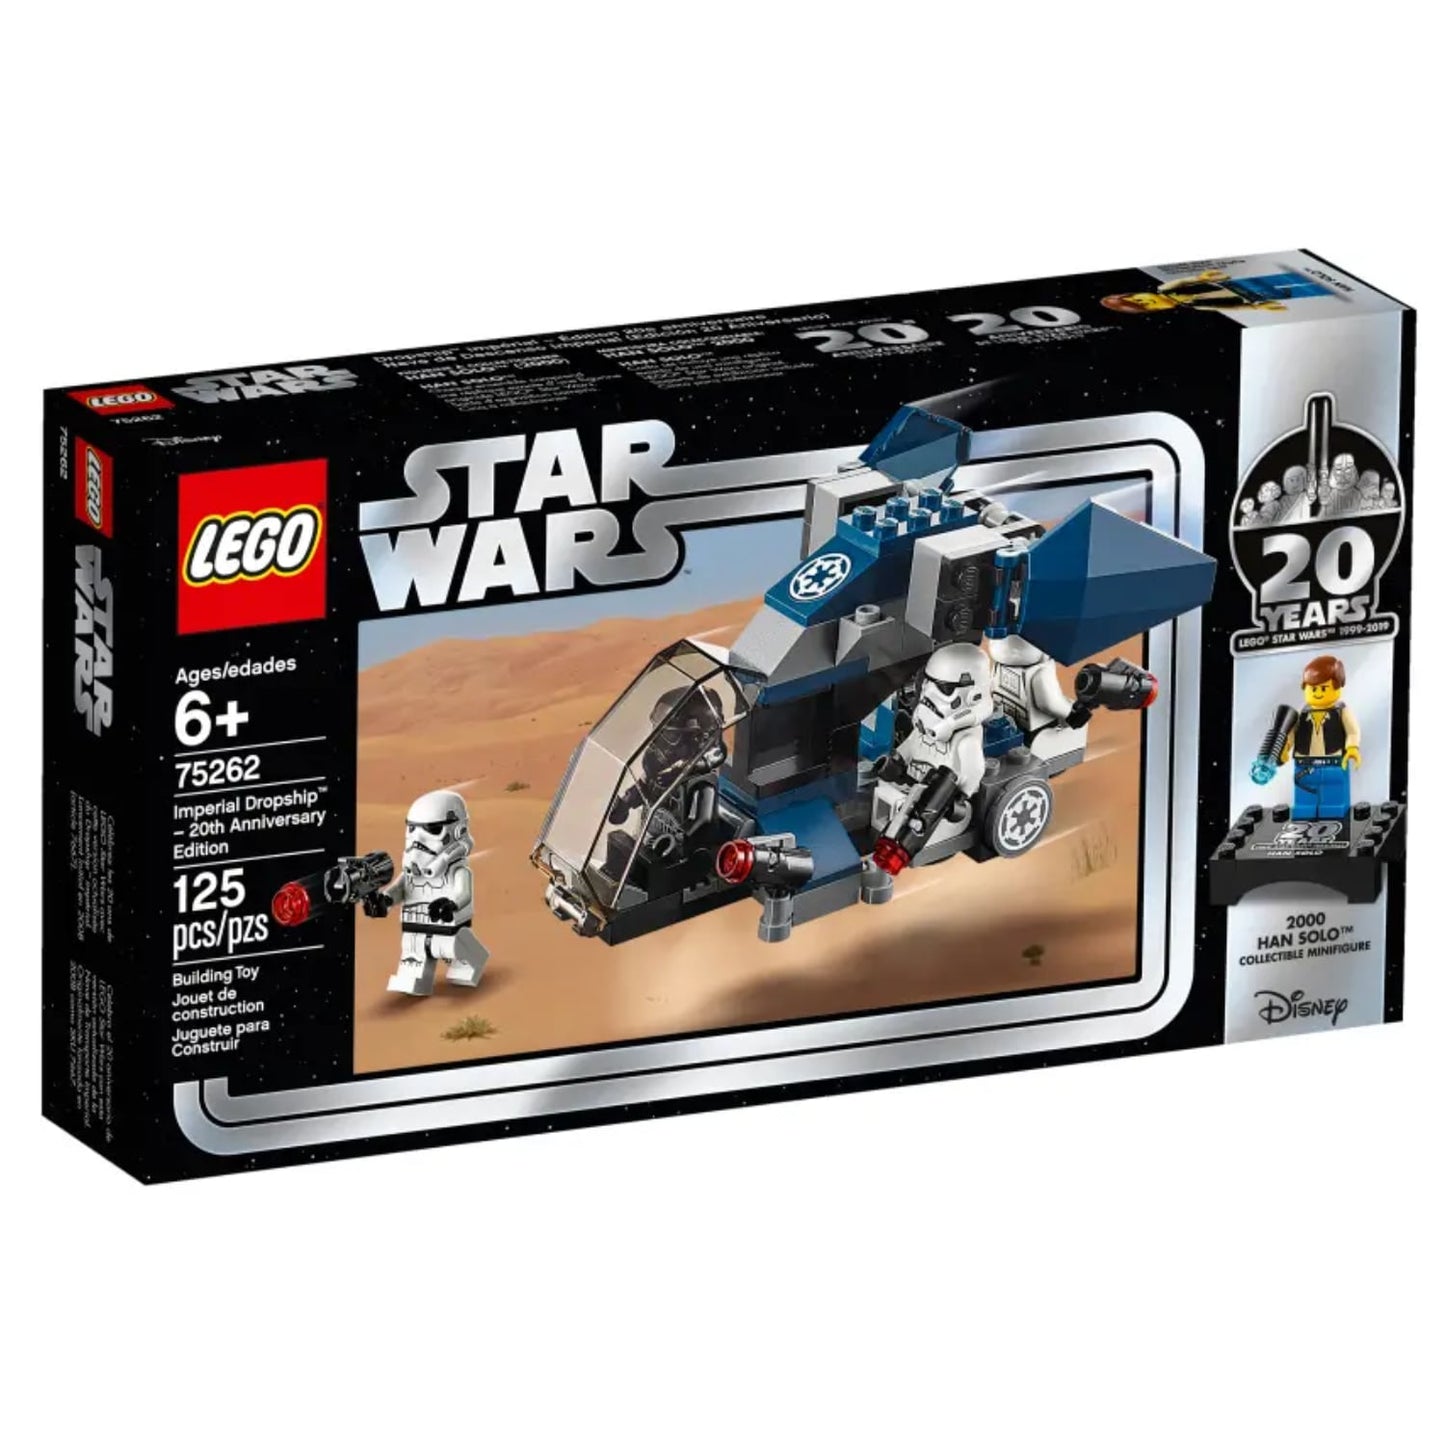 Lego 75262 Star Wars Imperial Dropship – 20th Anniversary Edition